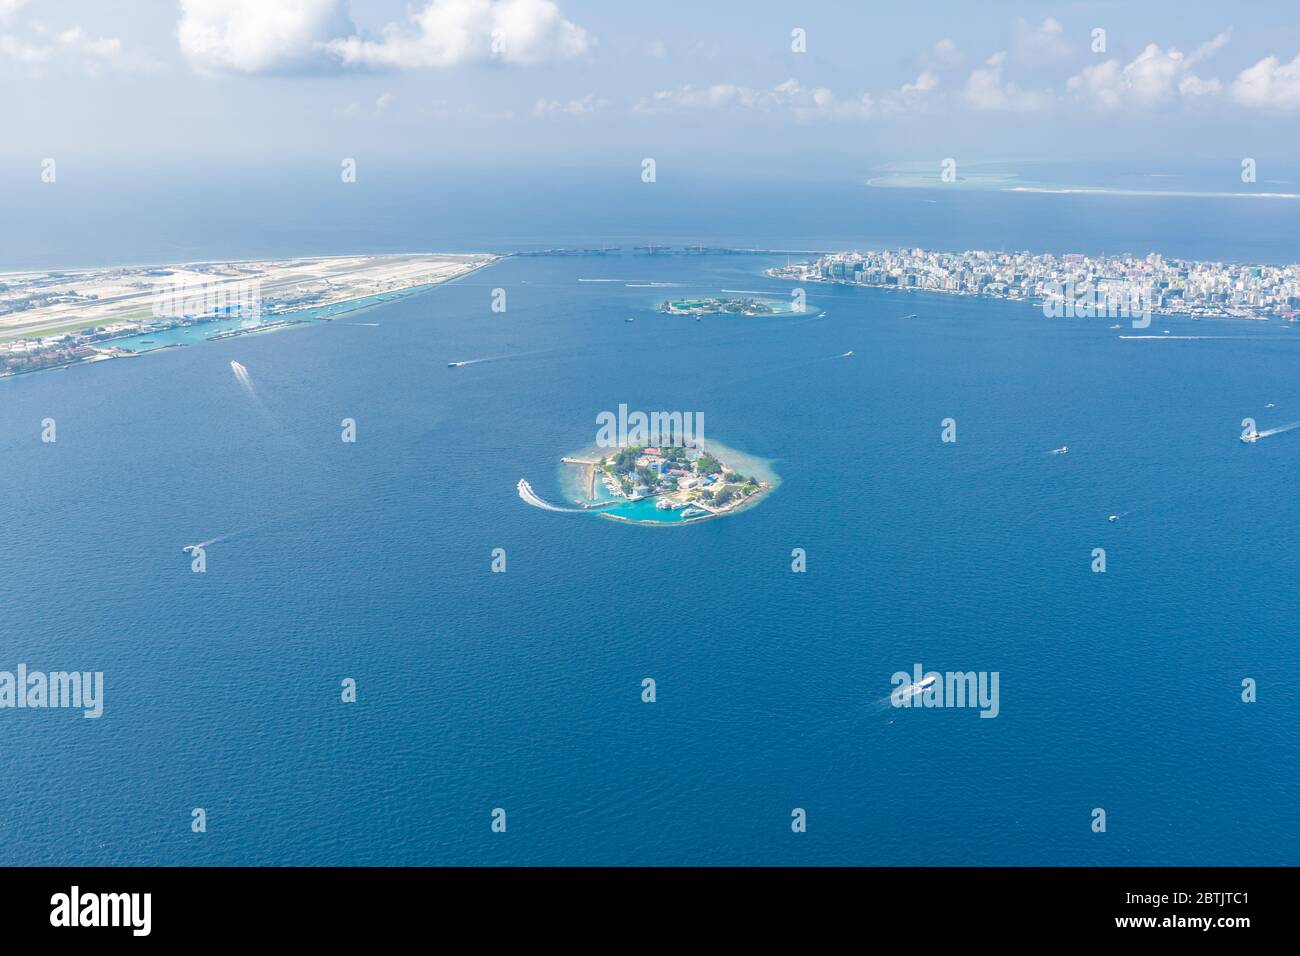 Maldives island capital island, Male. Hulhumale city island view from over the clouds. Aerial landscape in exotic travel destination Stock Photo